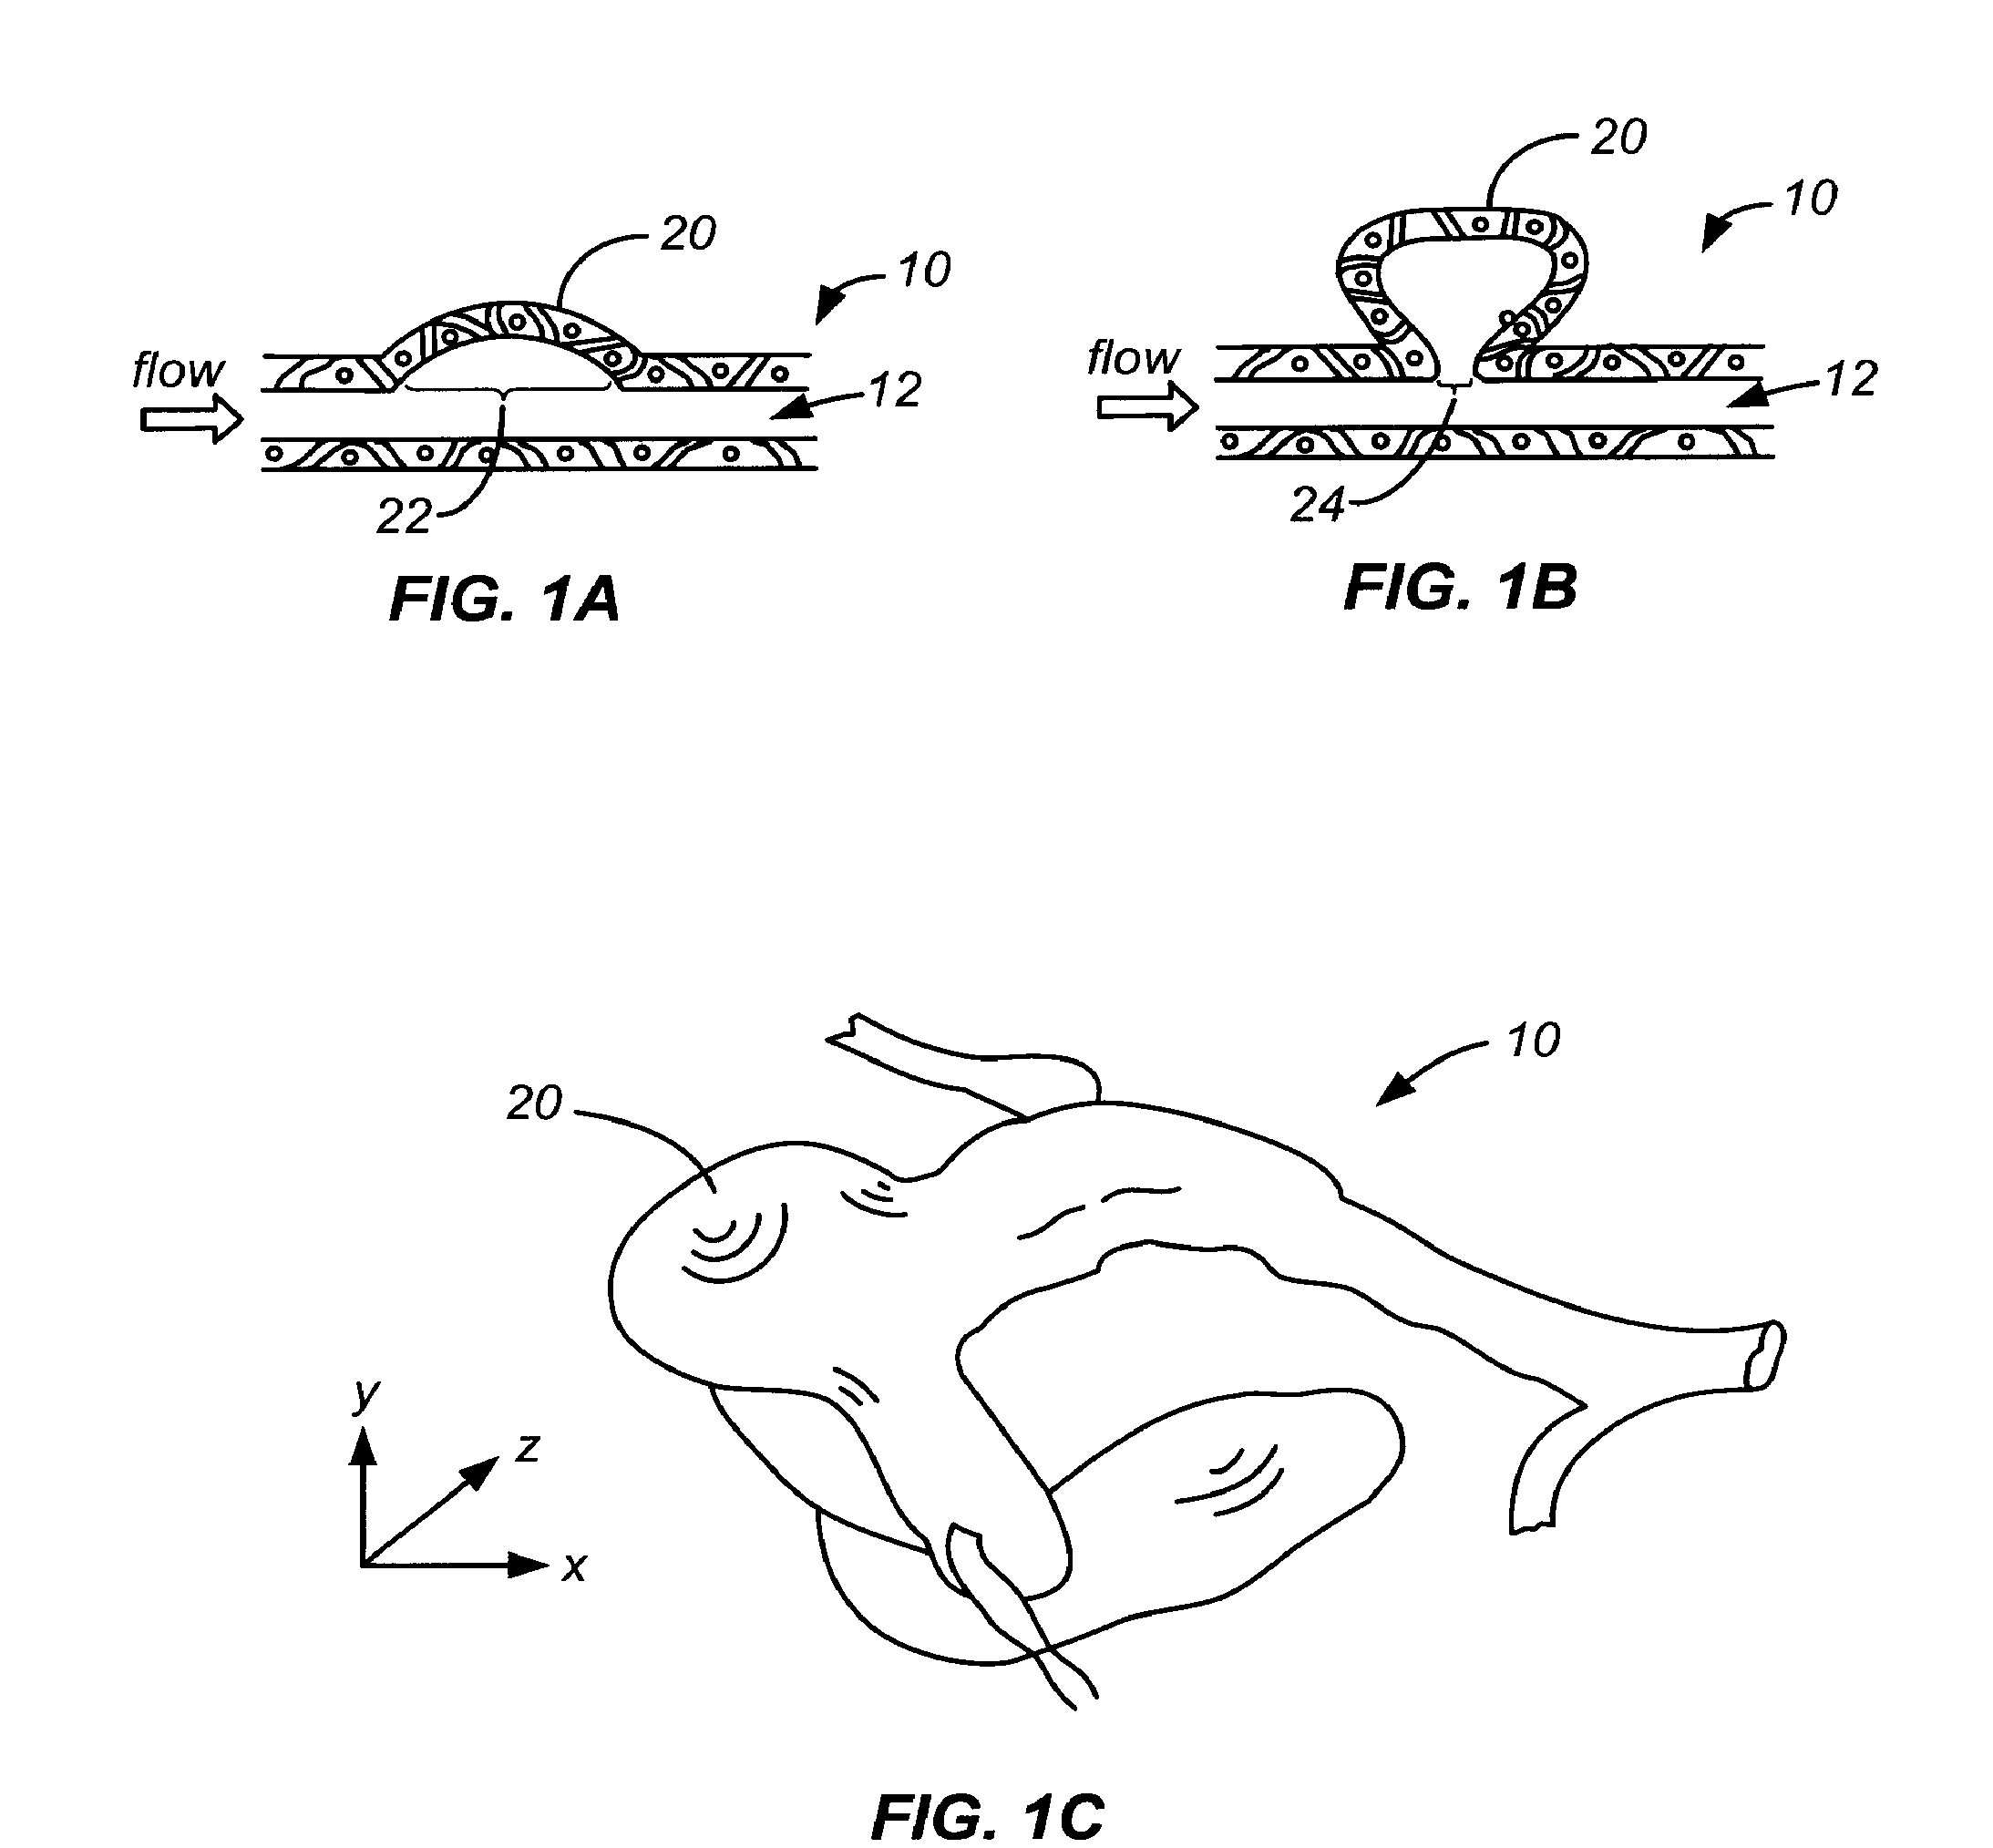 Devices and methods for accessing and treating an aneurysm